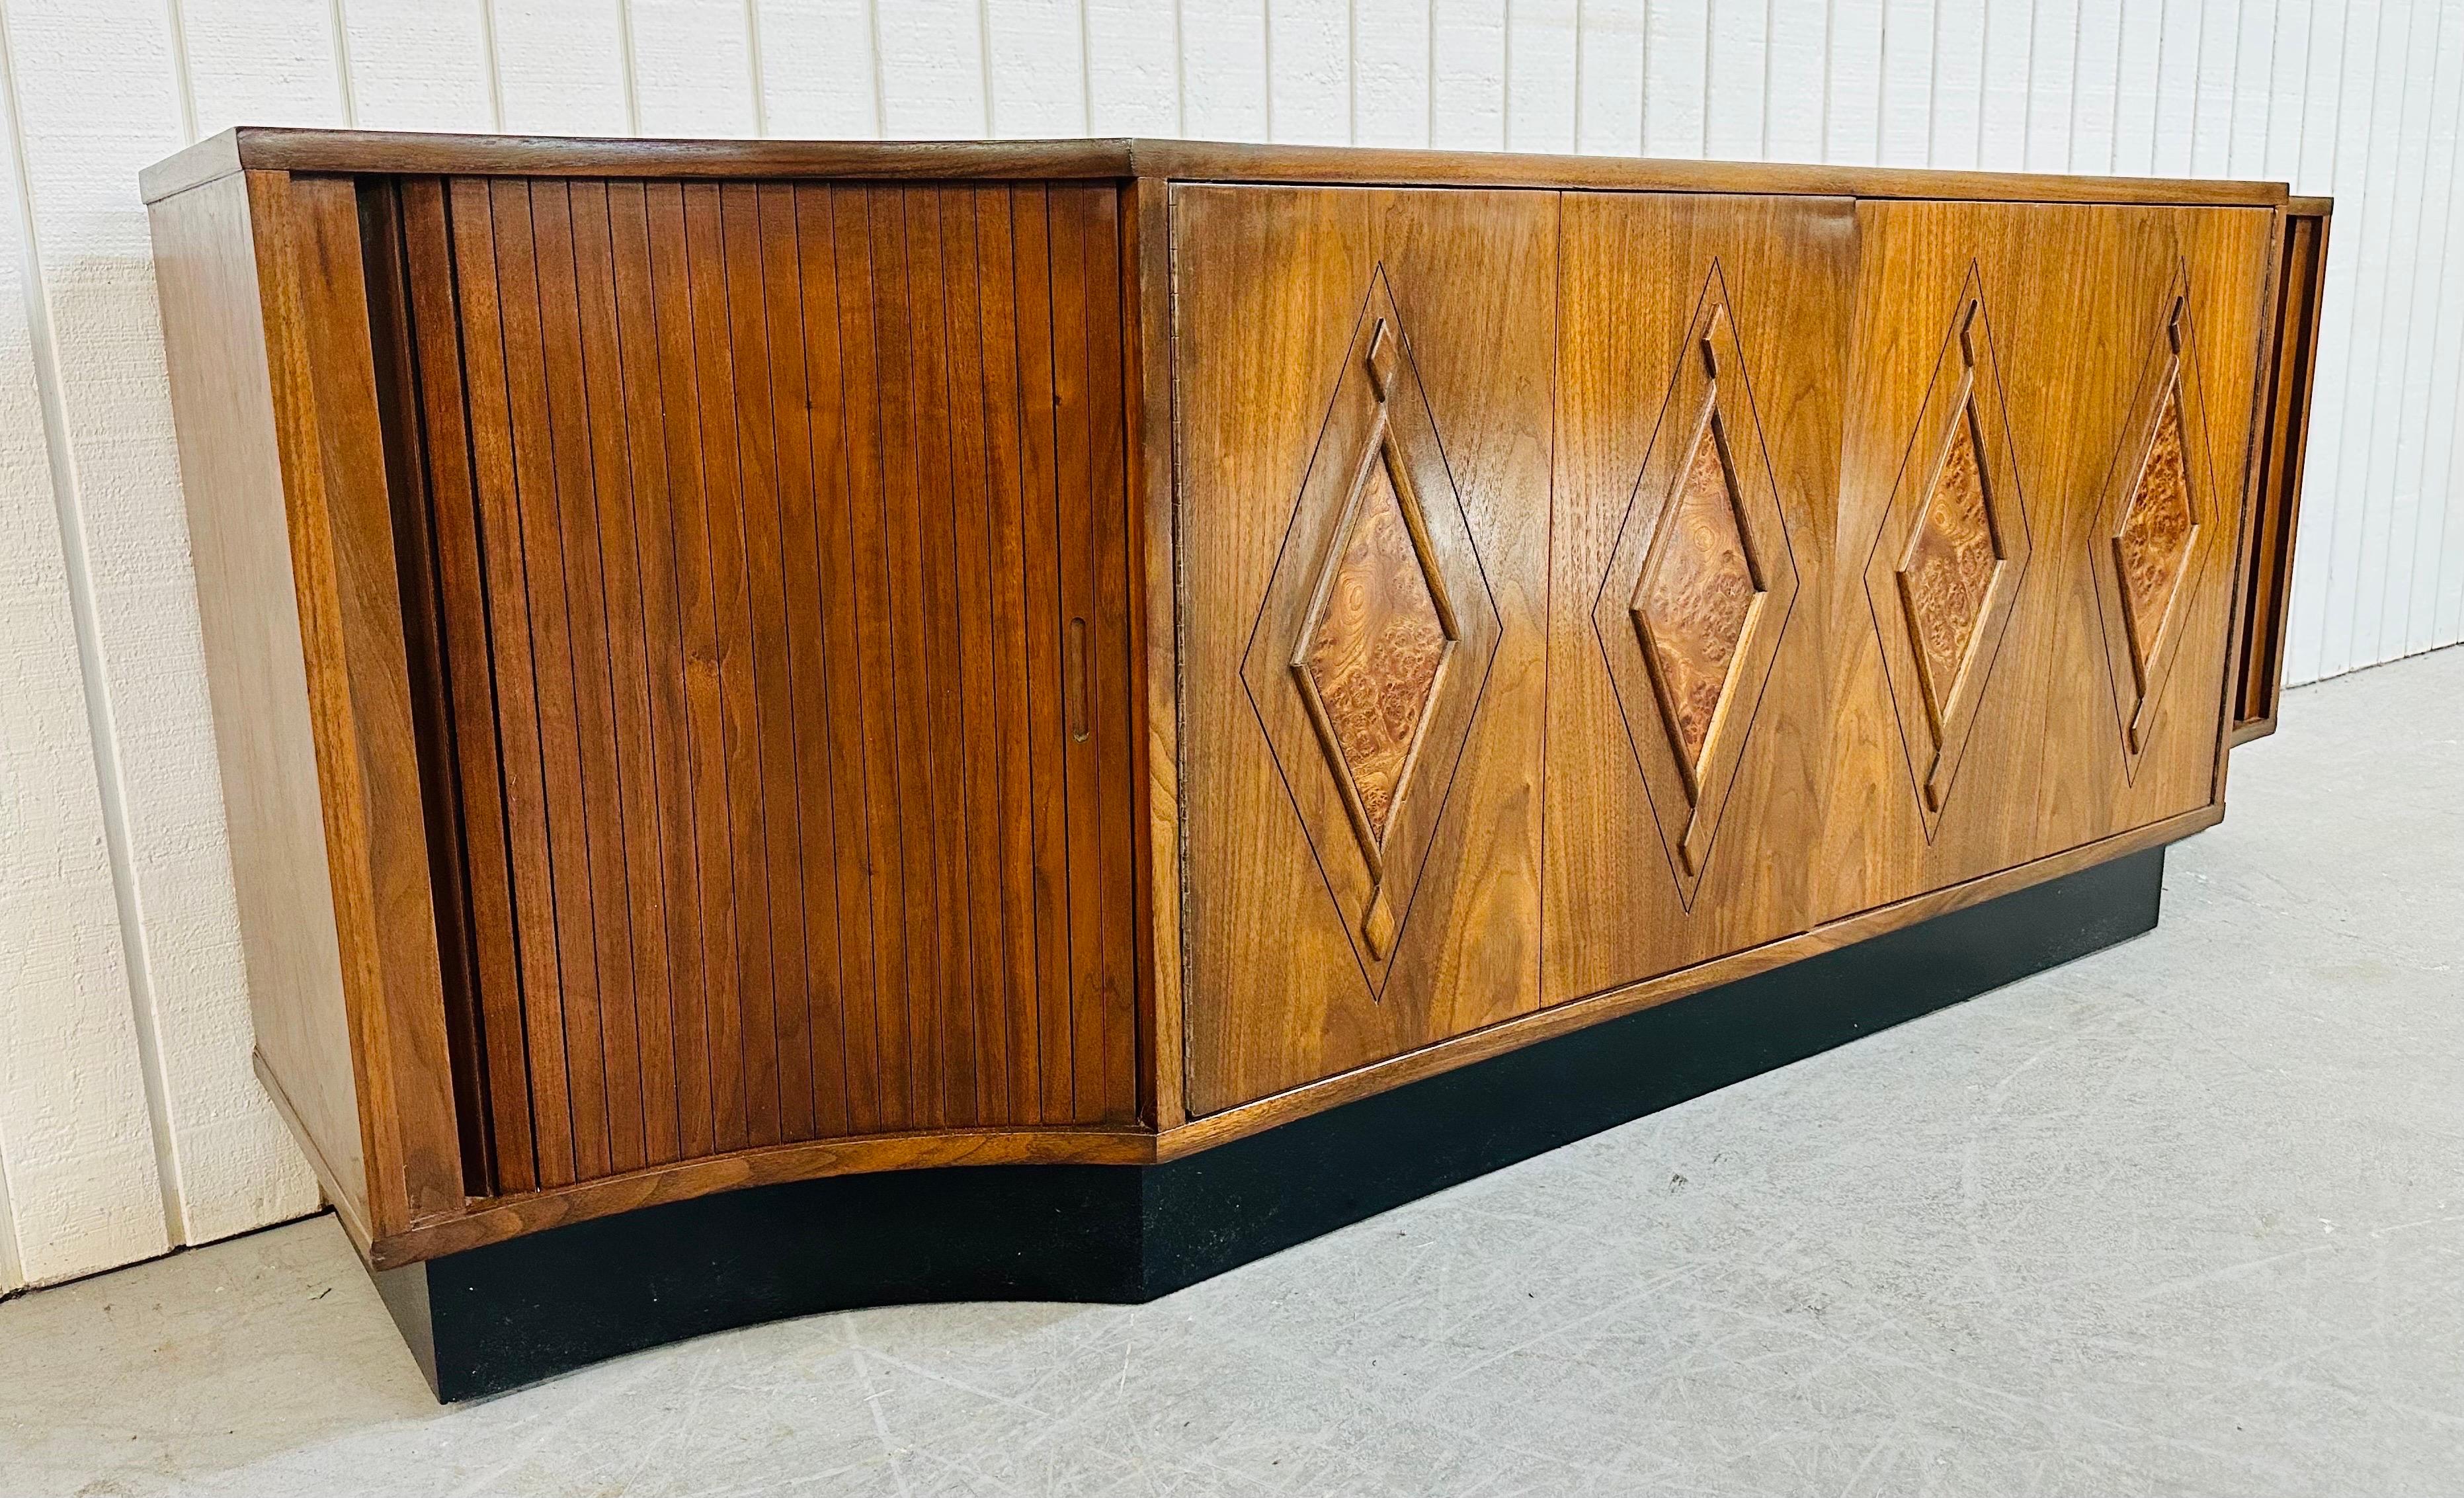 This listing is for a Mid-Century Modern Walnut Tambour Door Sideboard. Featuring a 84” L walnut top, center doors that push open to a shelf, sliding tambour doors on each end that open up to more storage space, a beautiful burled walnut diamond